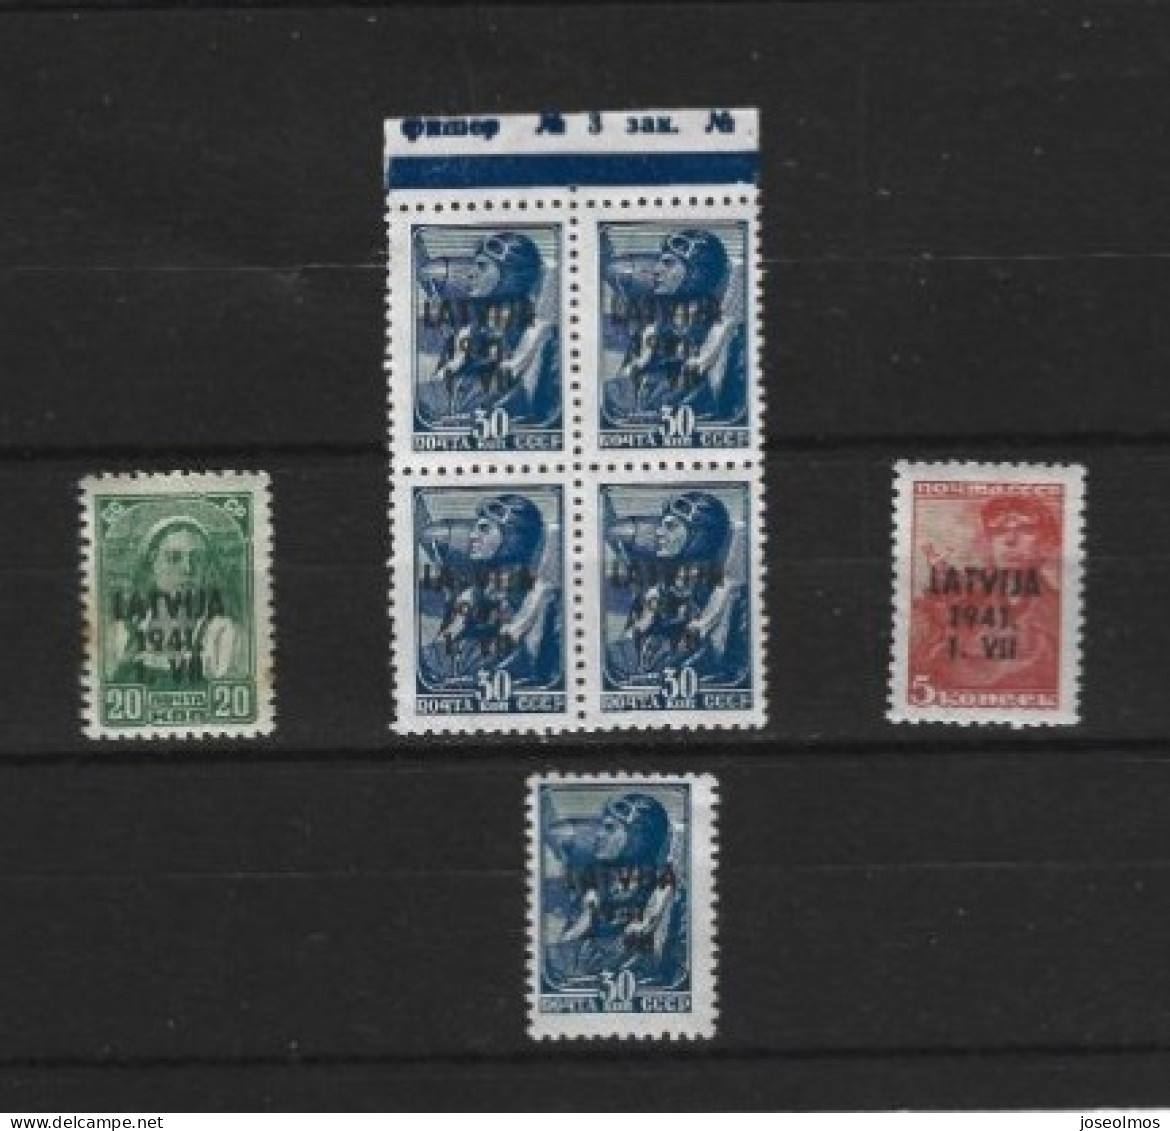 TIMBRES OCCUPATION LETTONIE NEUF**/* ANNEE 1941 N° 1-4-5 Y&T - Unused Stamps